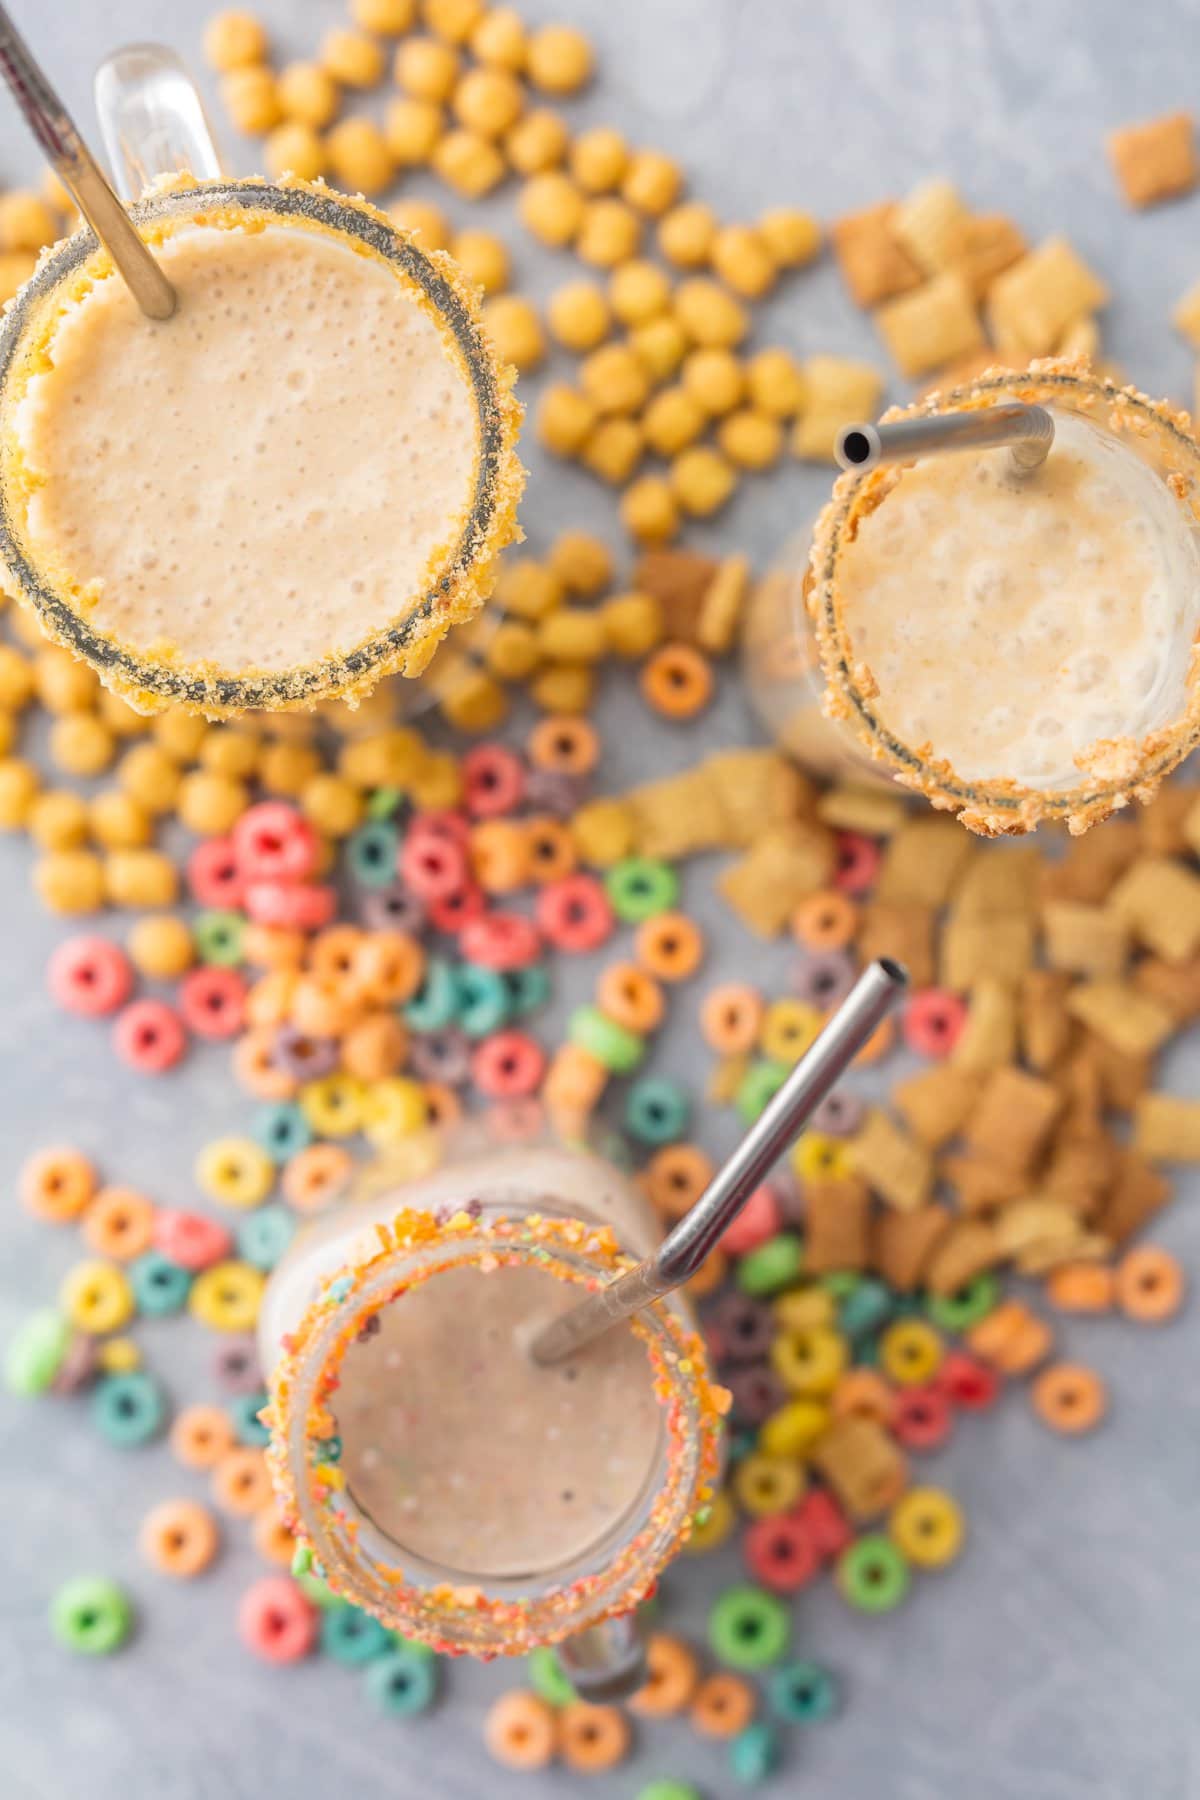 Cereal Milk Breakfast Smoothies surrounded by cereal